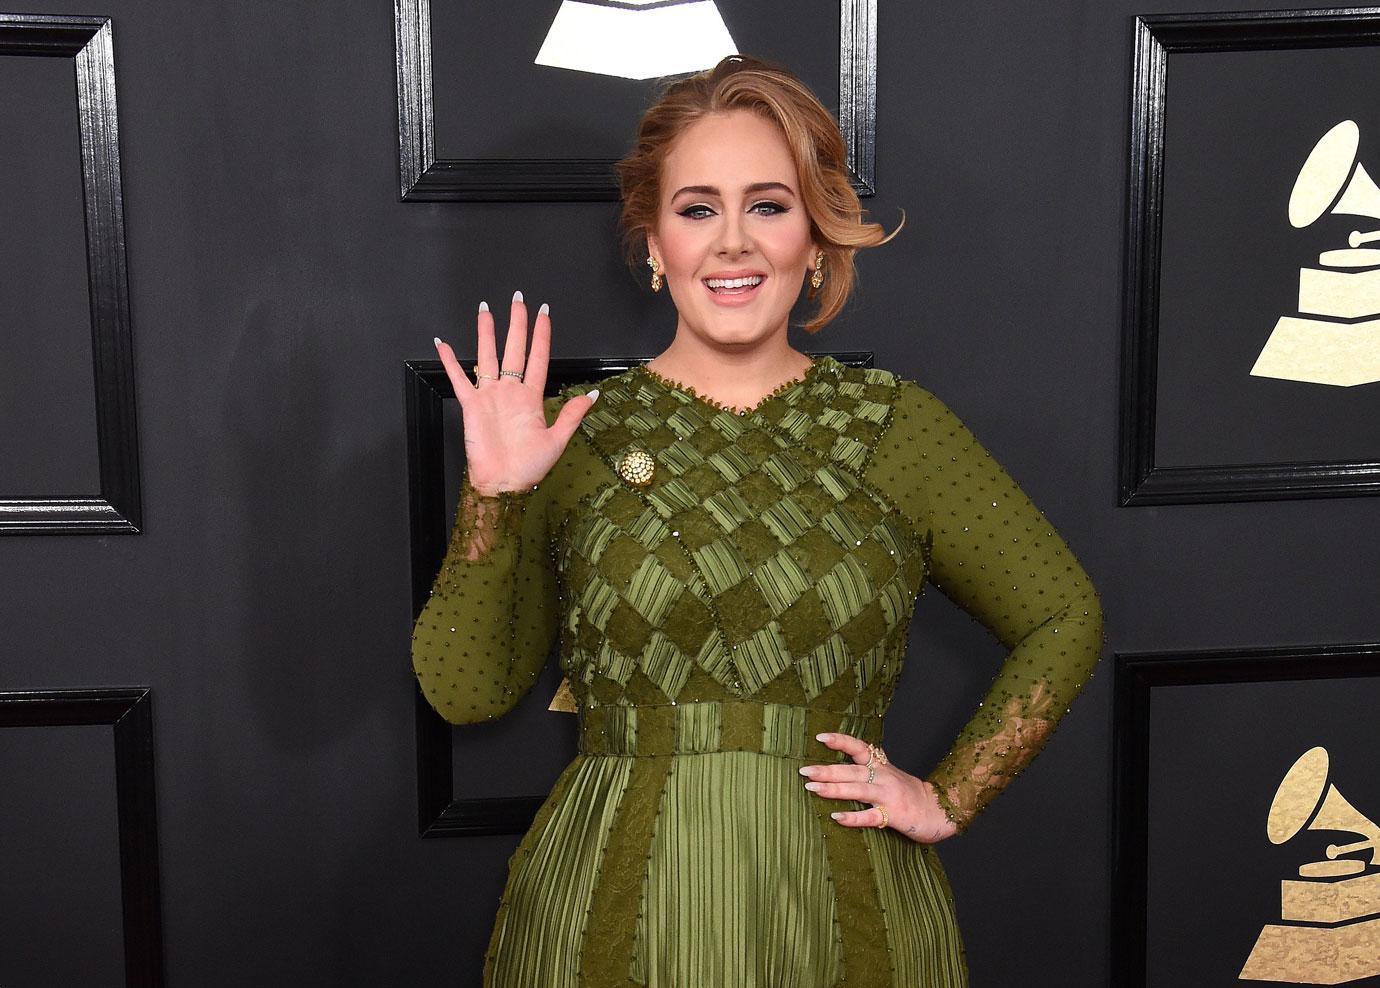 Adele wore a leopard dress to Beyoncé's Oscars after party